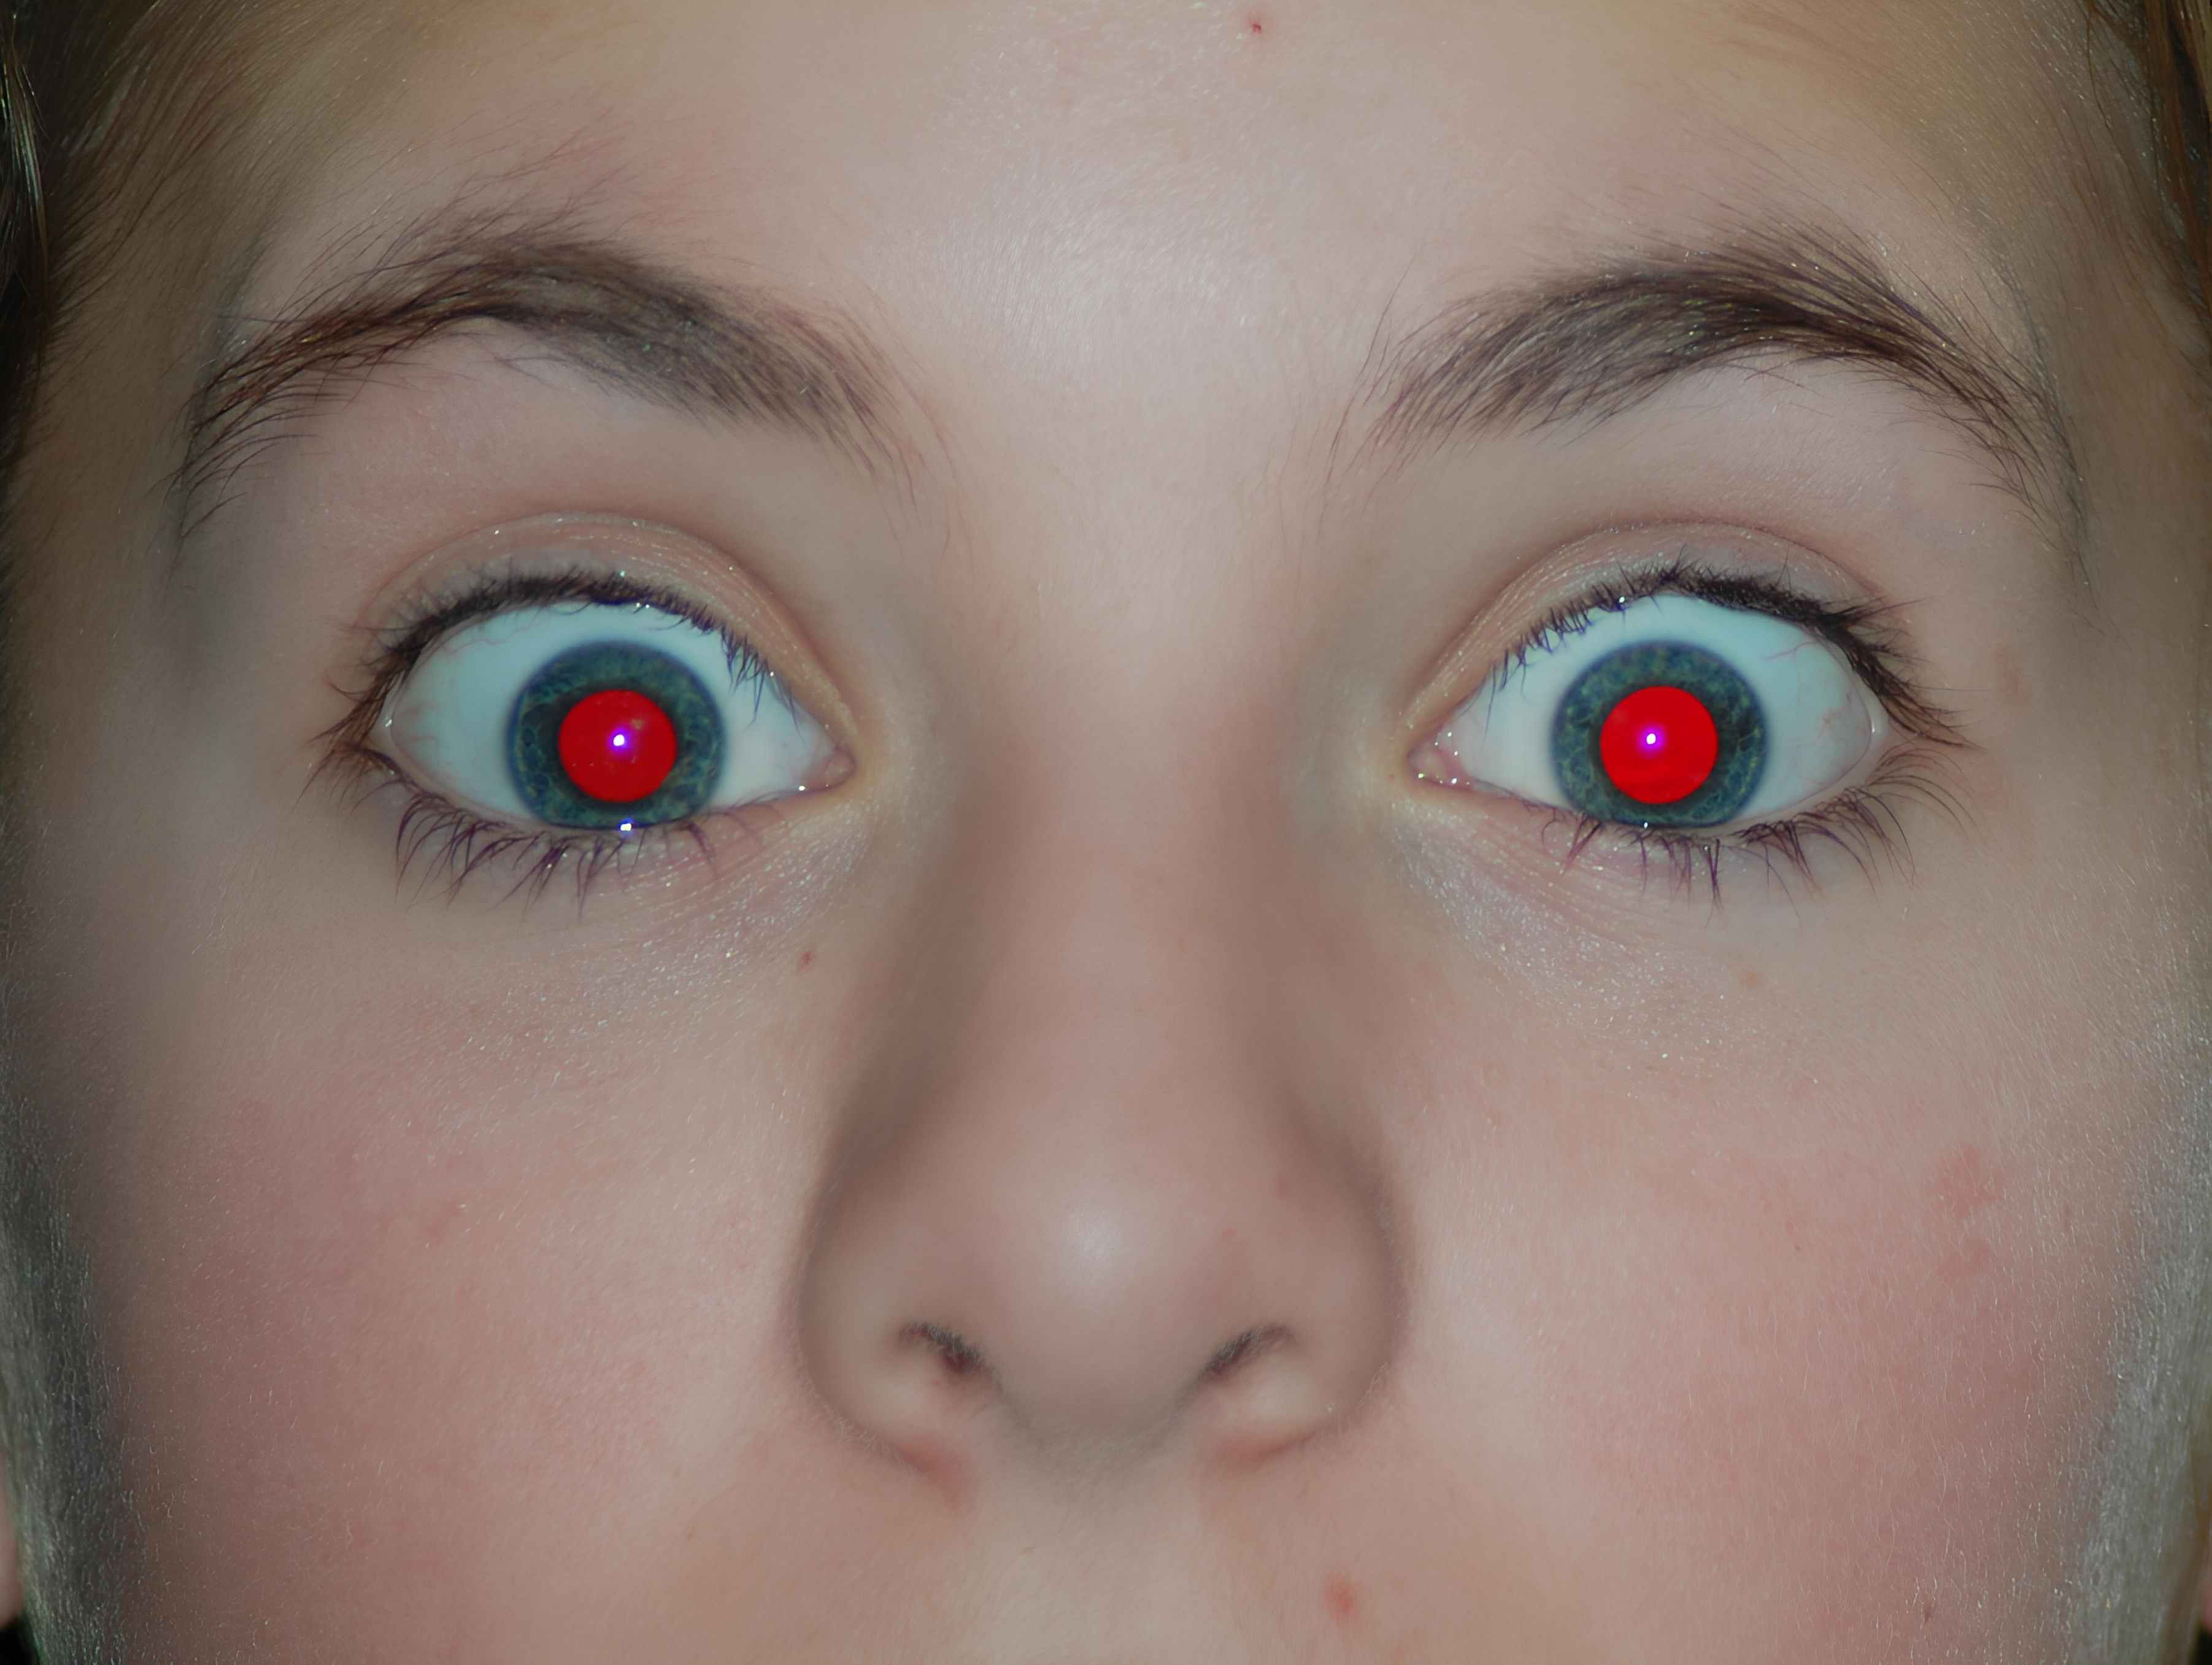 Intense red-eye effect in blue eyes with dilated pupil